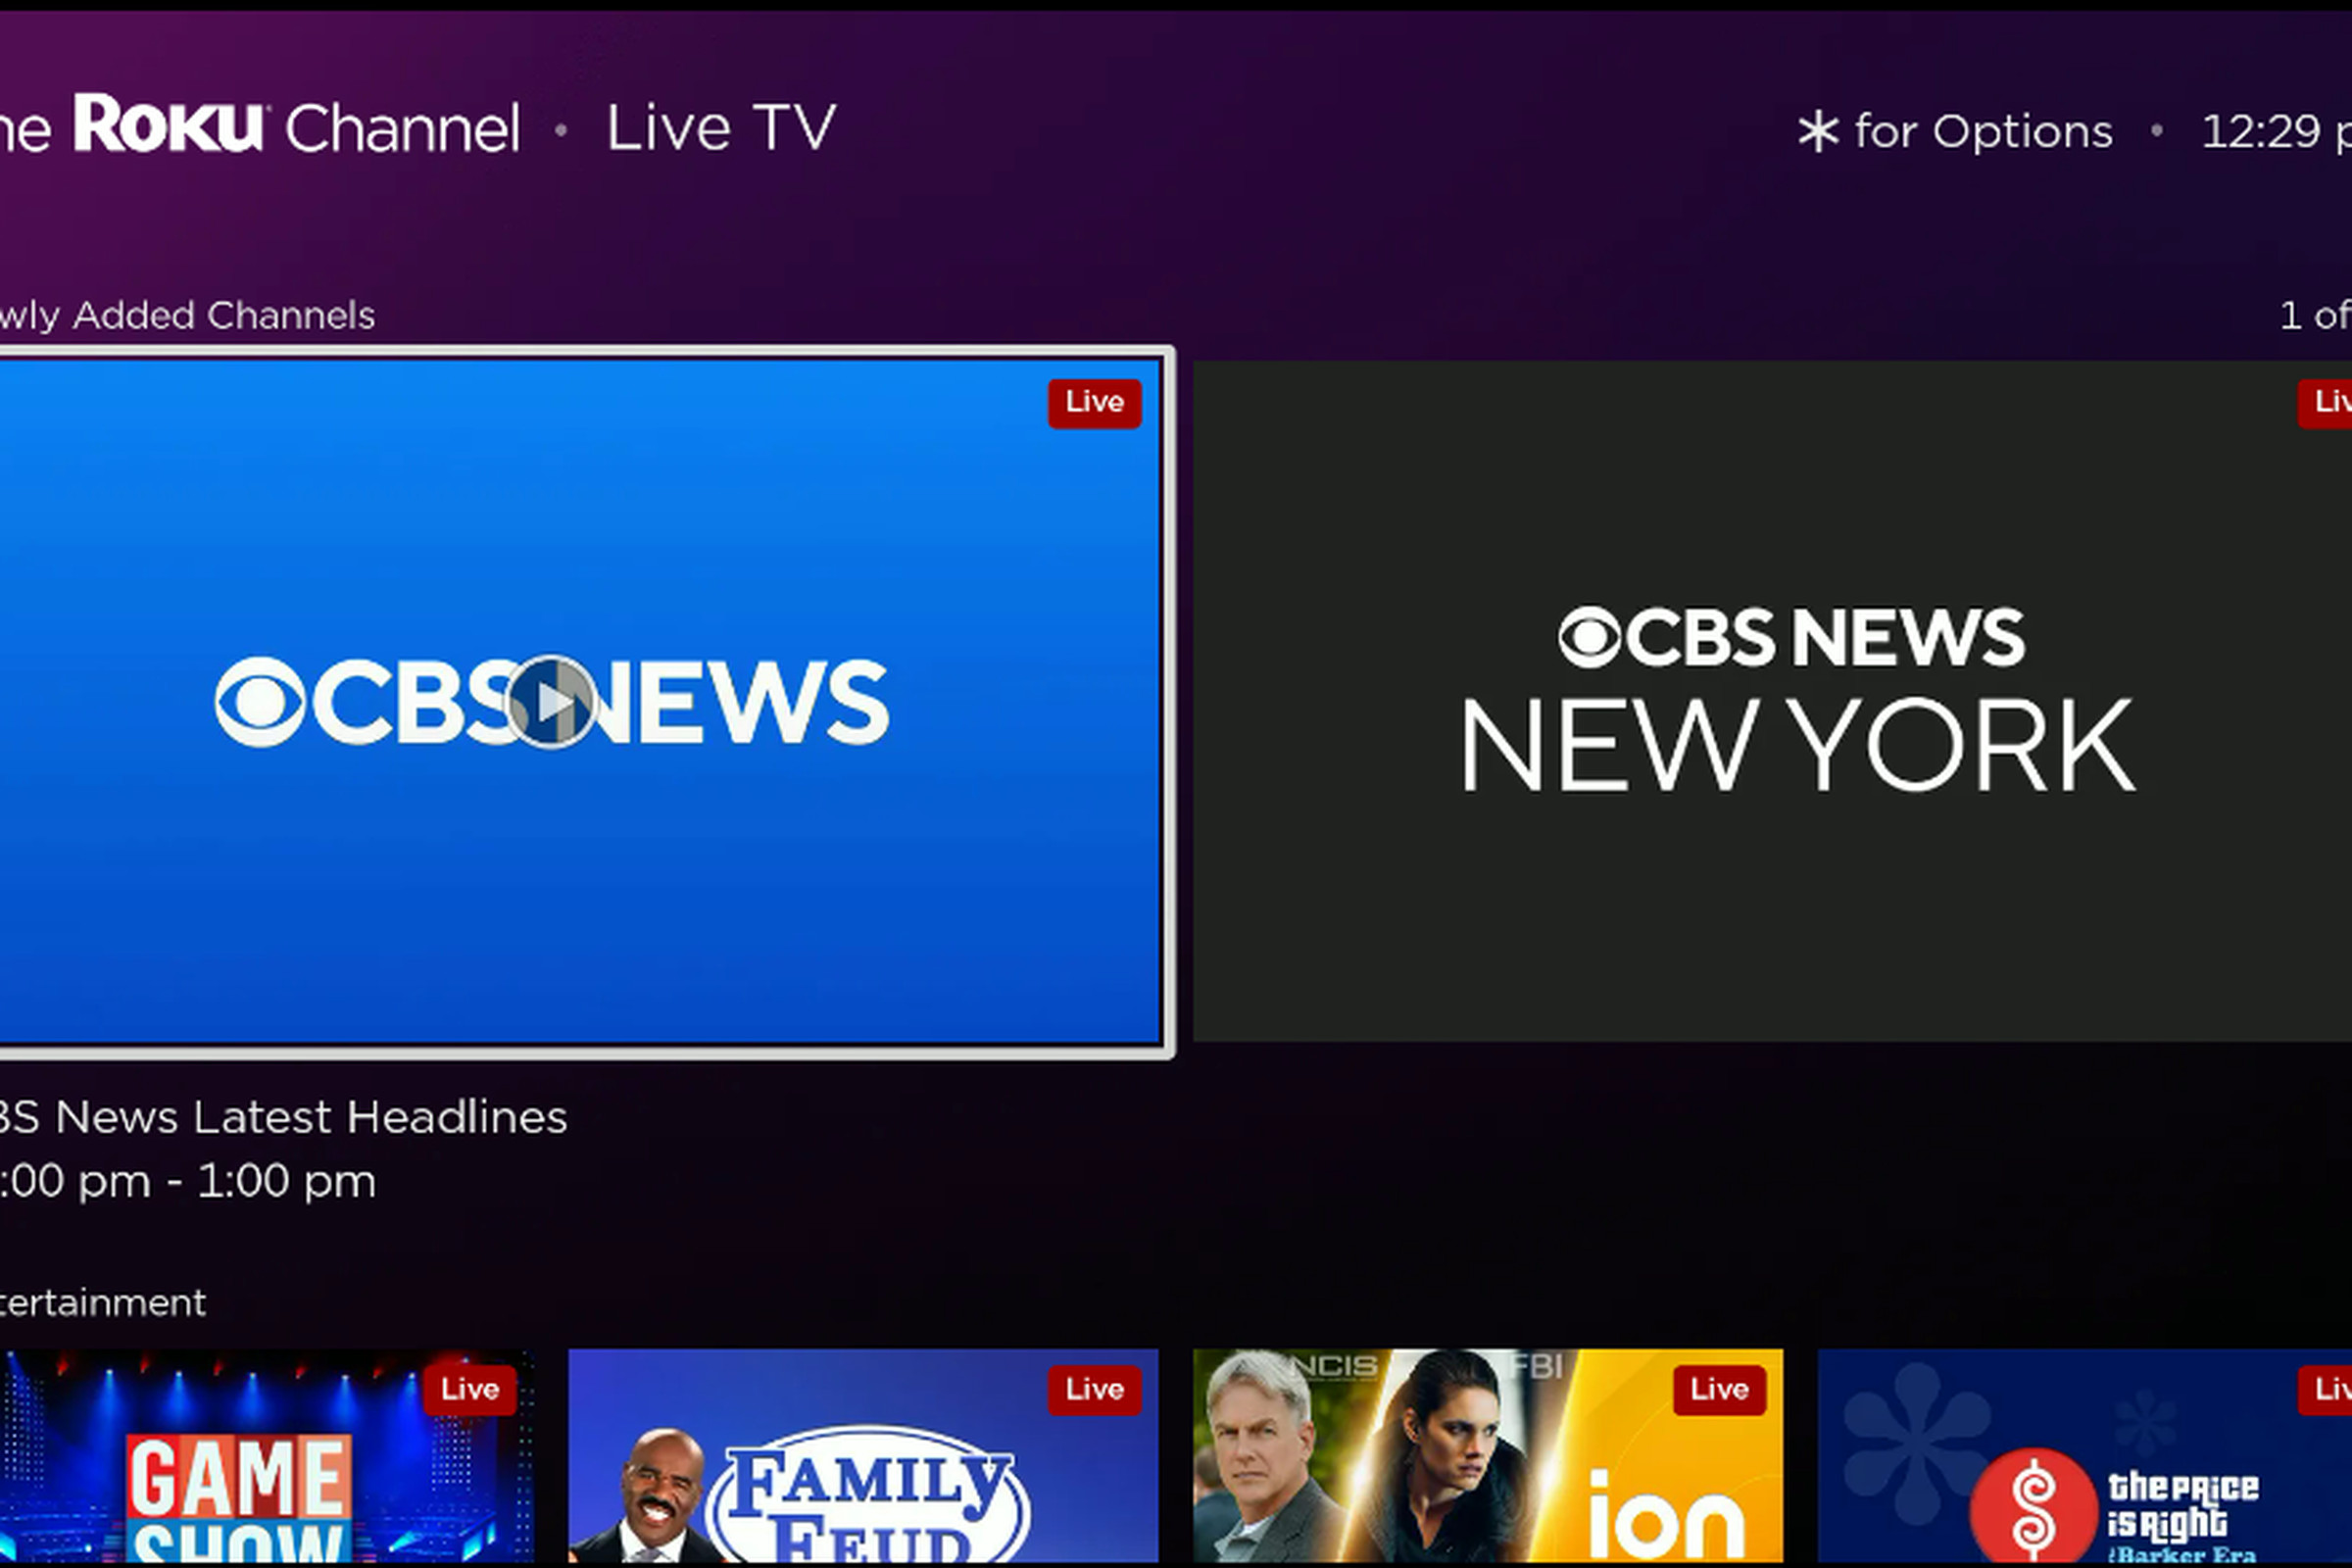 An image of the Roku Channels UI with prominent blocks for live news from CBS.